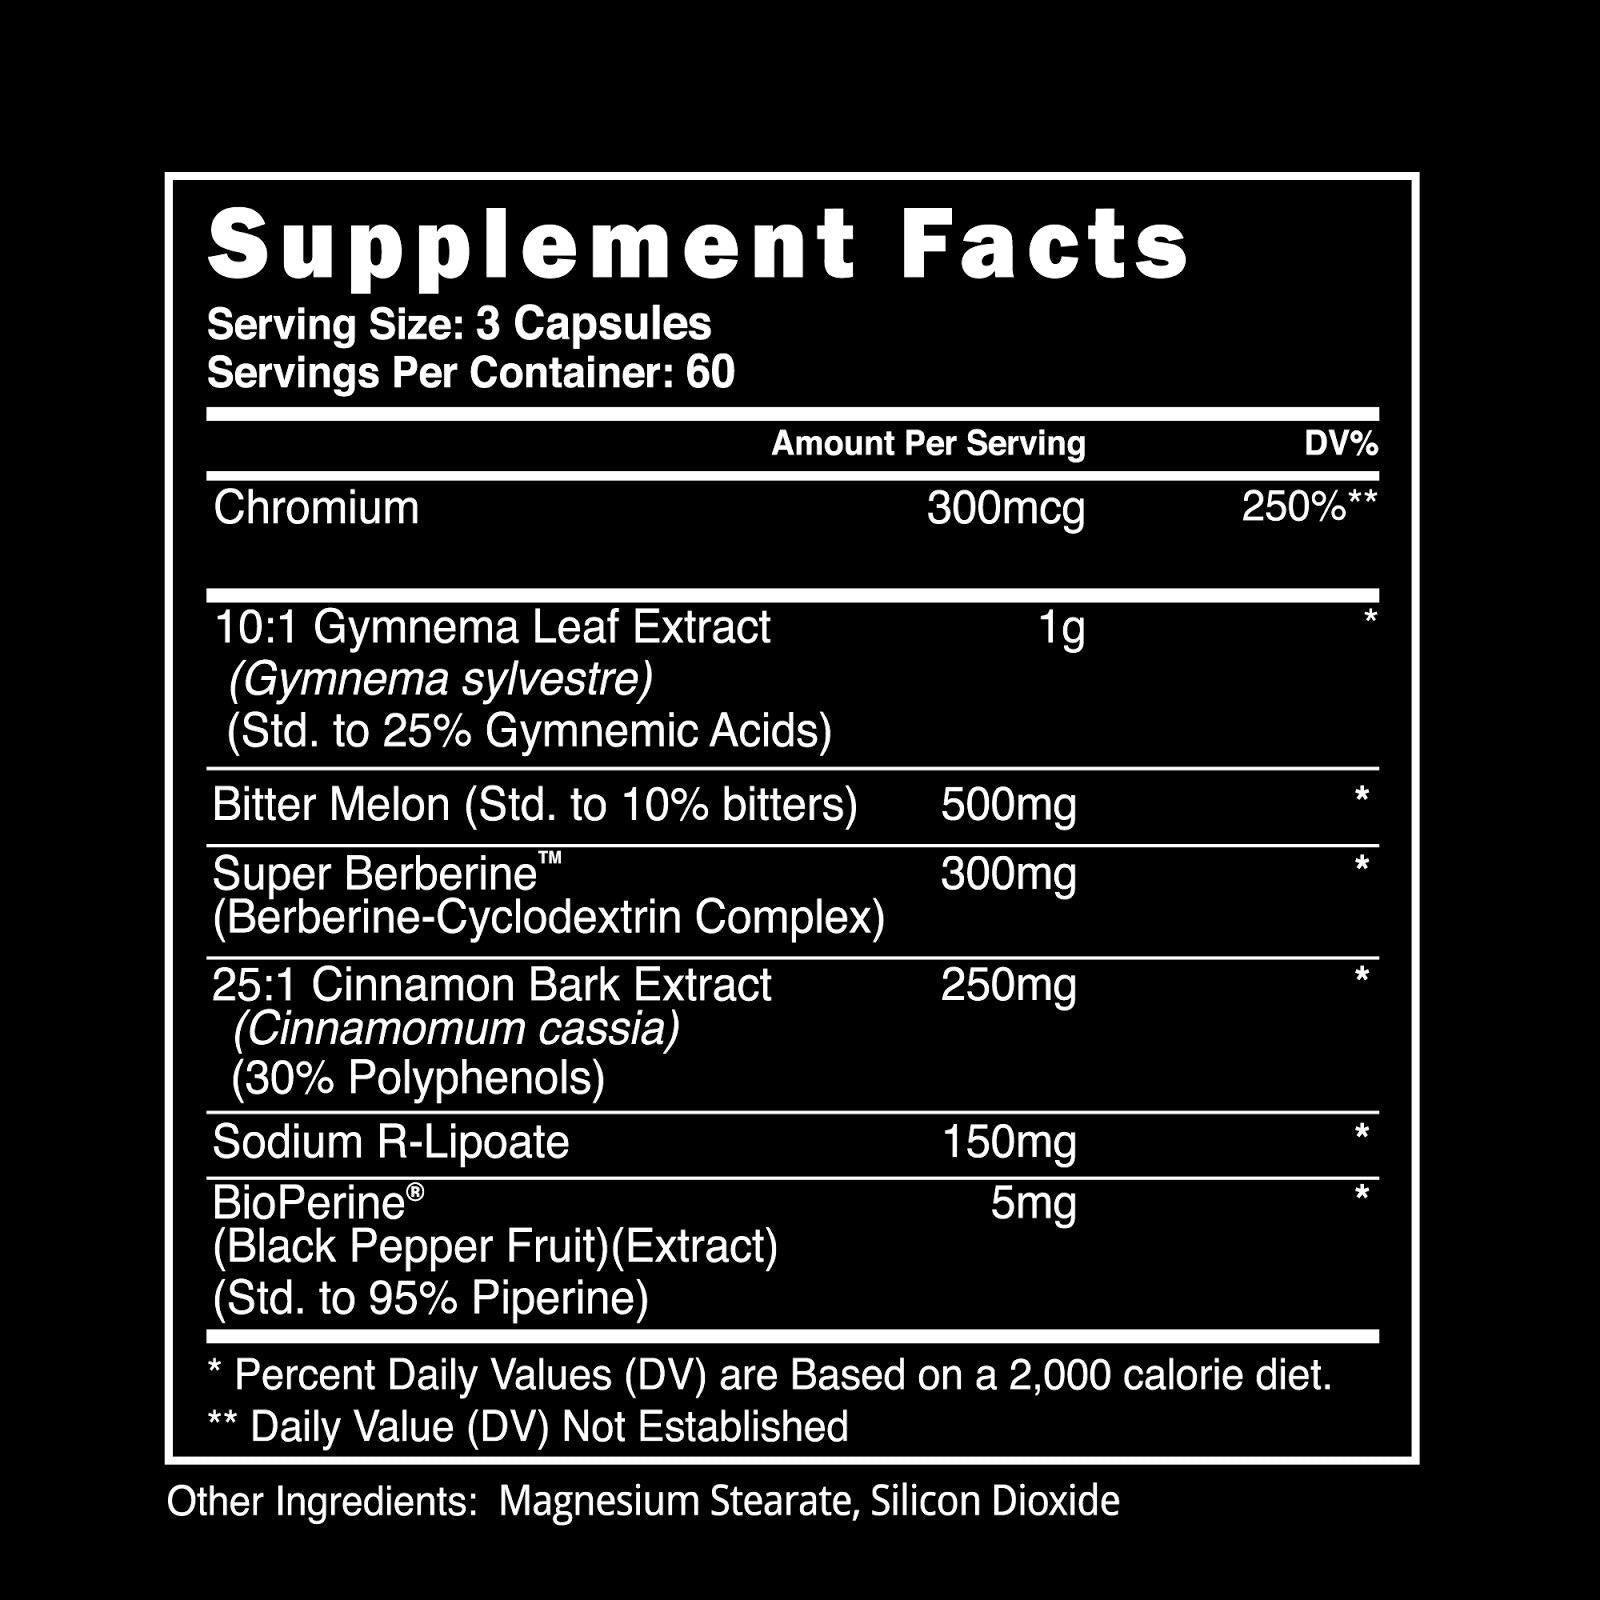 Blackstone Labs Glycolog | Muscle Players